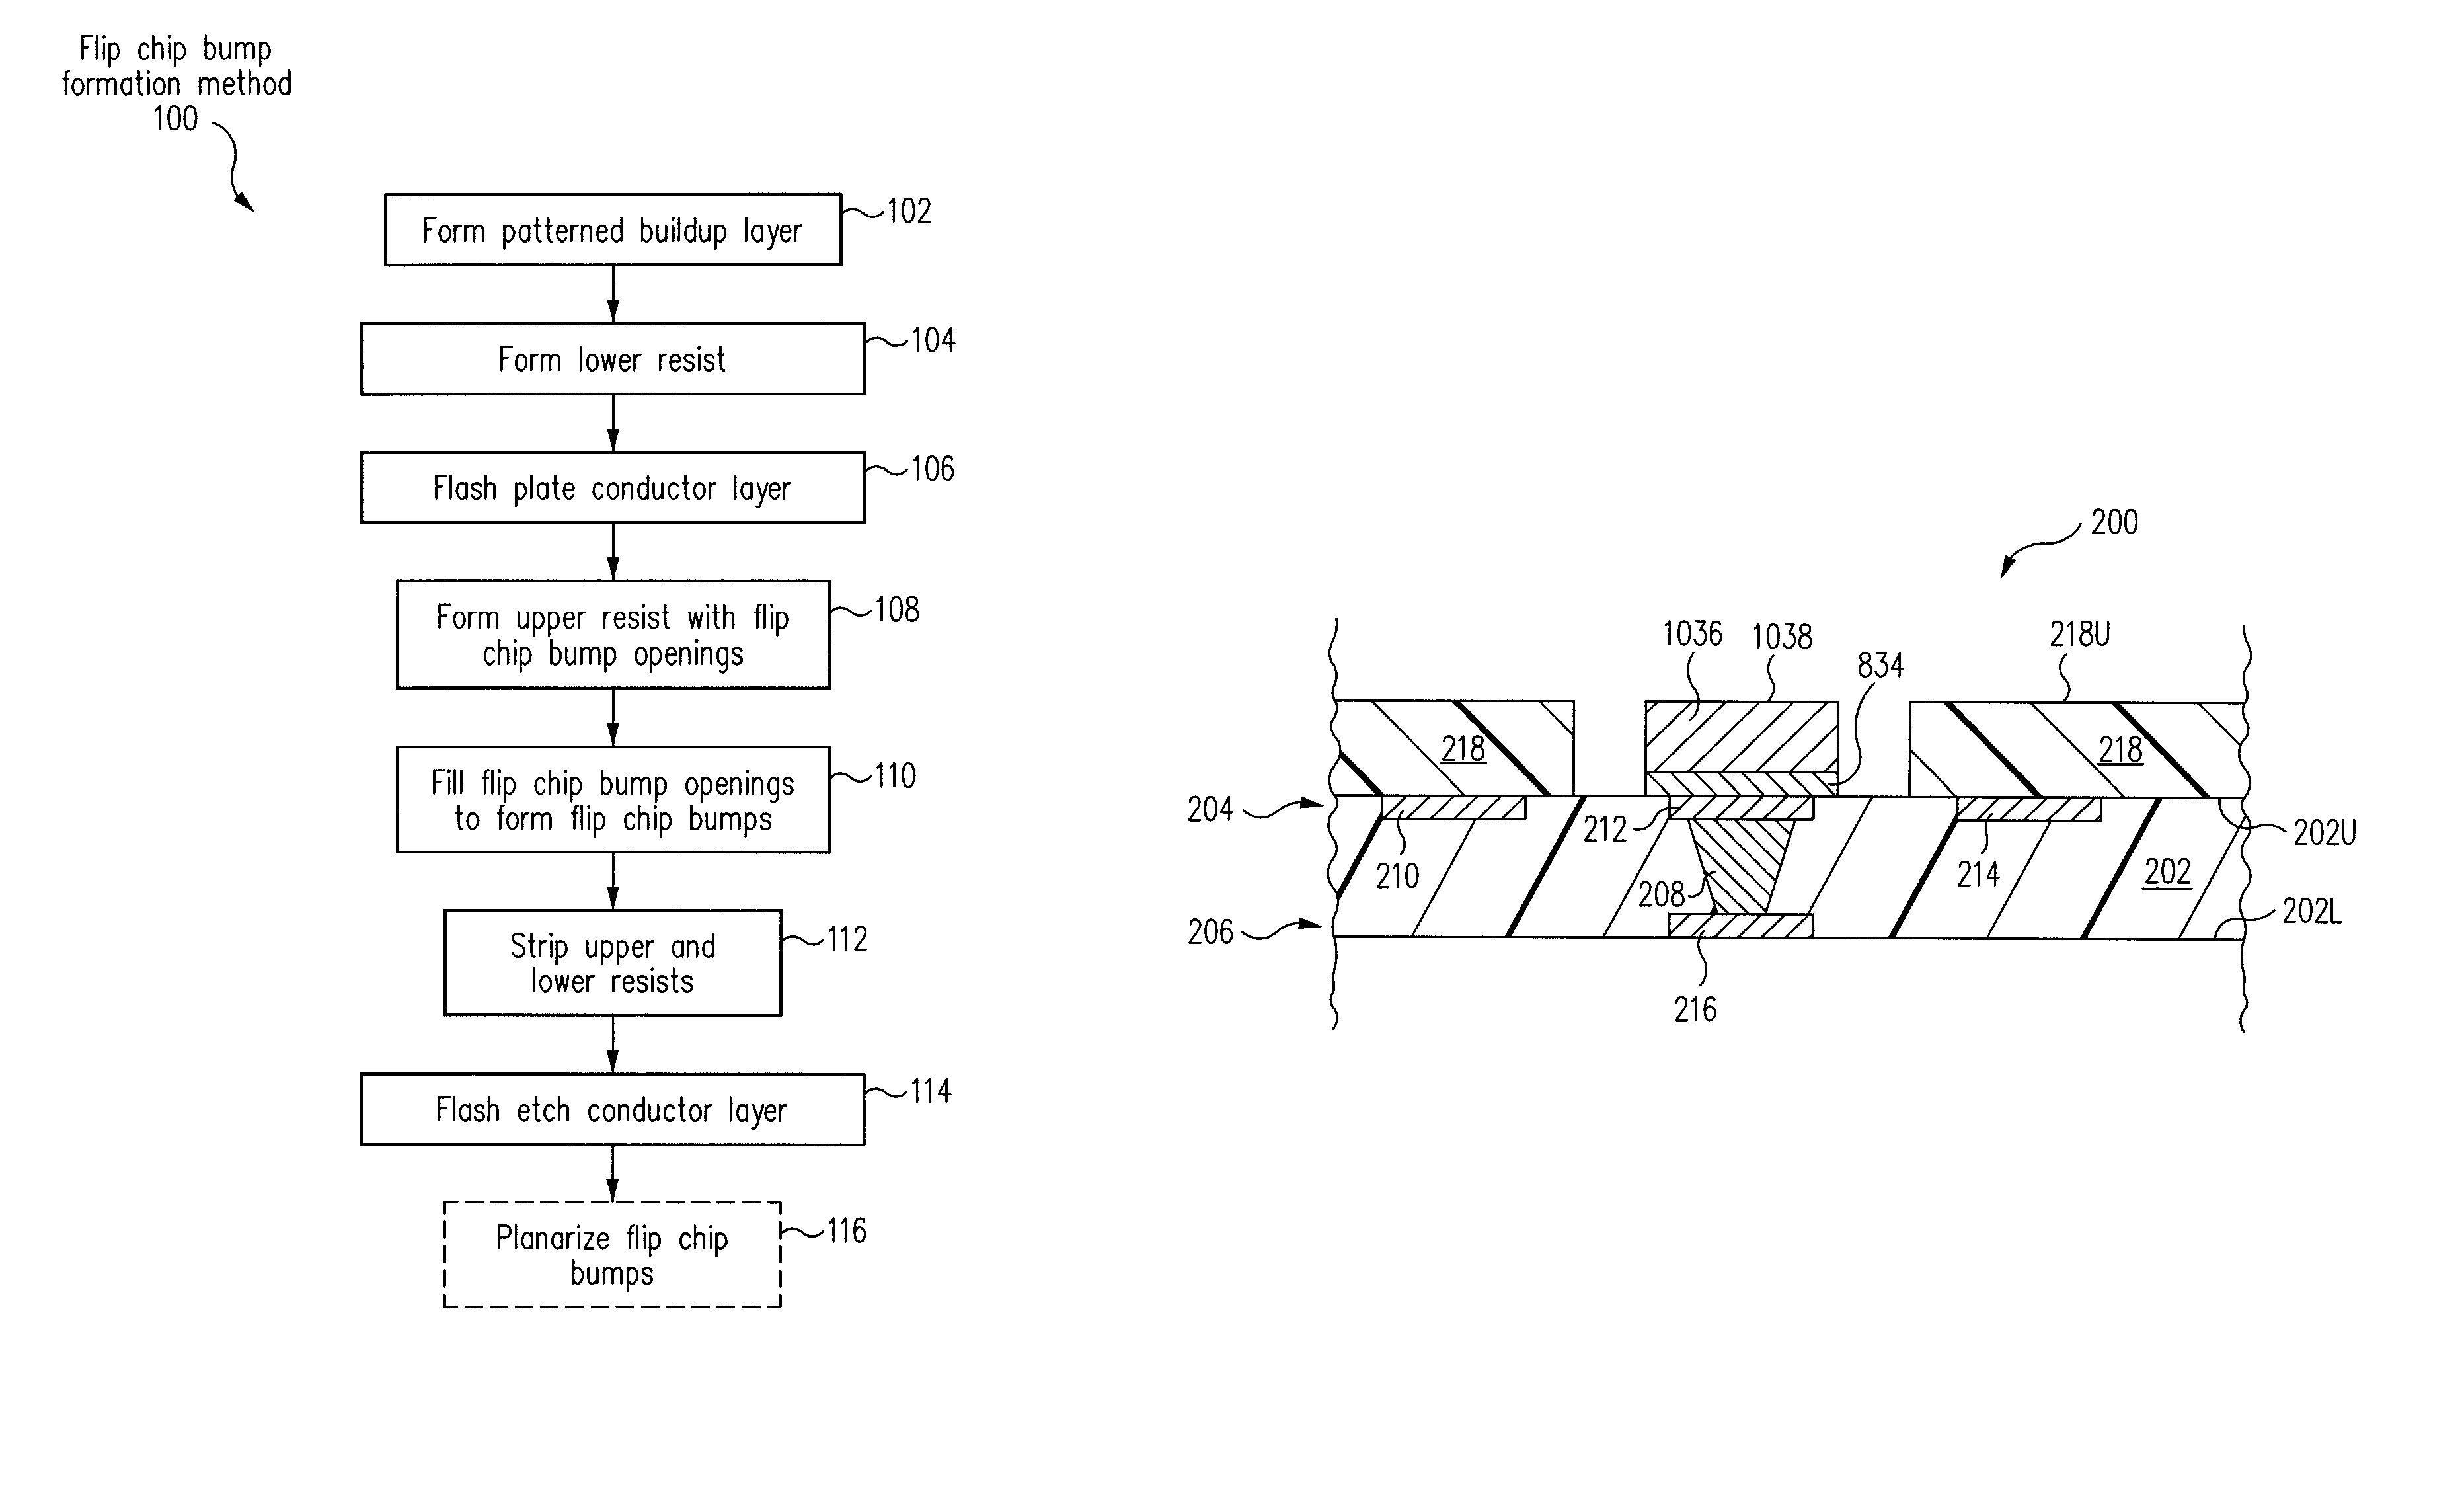 Flip chip bump structure and fabrication method